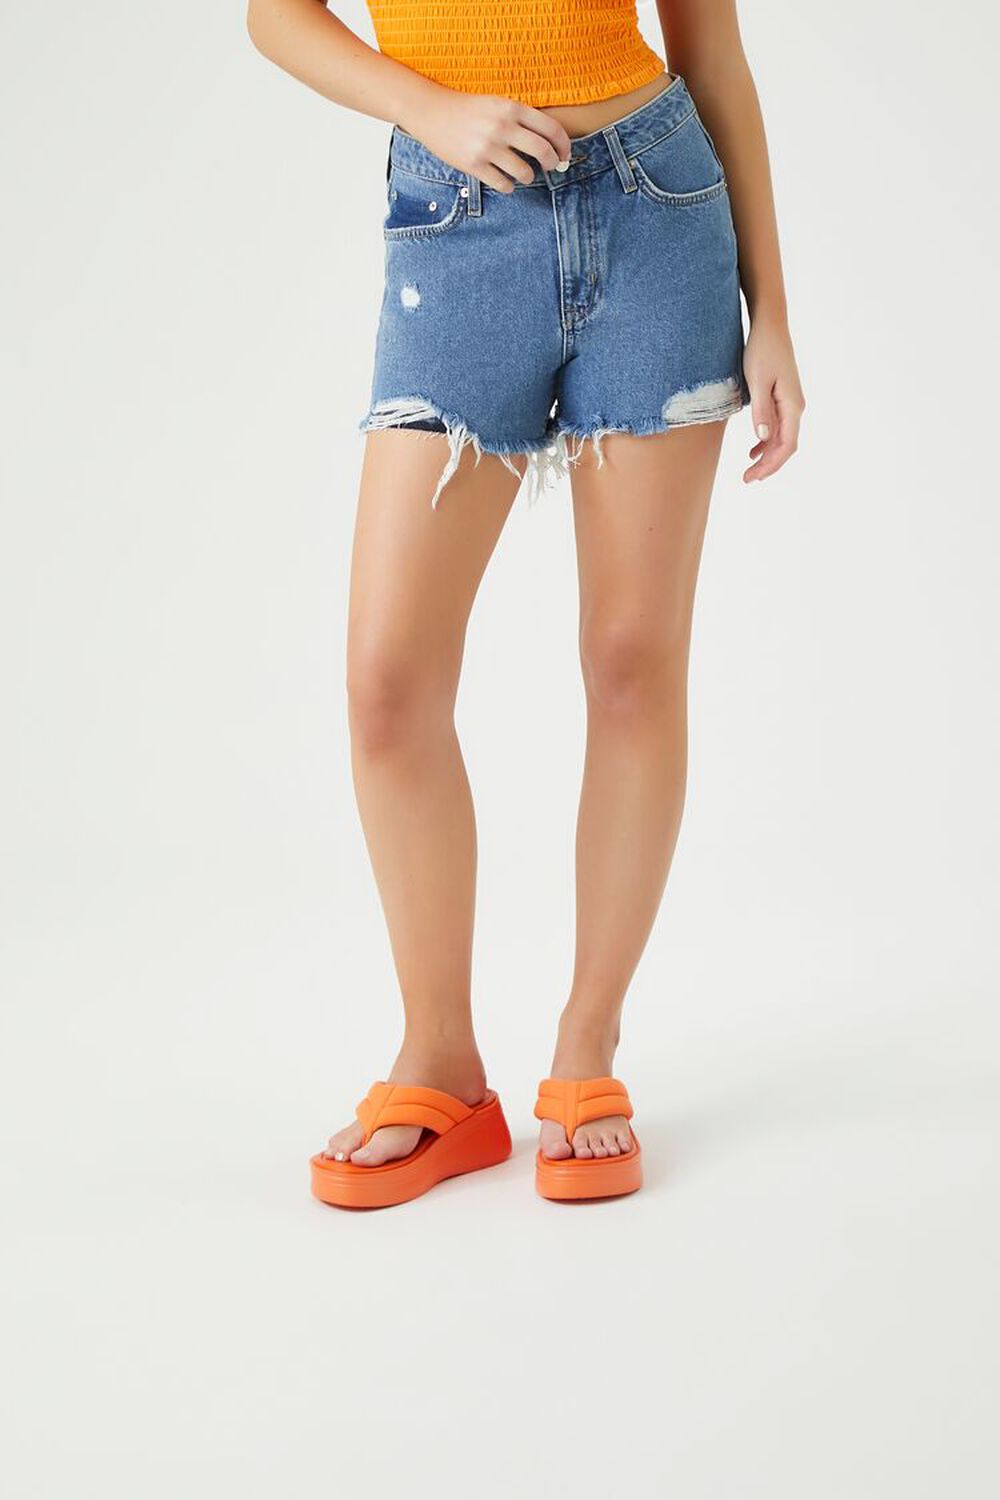 melodisk Validering politiker Recycled Cotton Retro High-Rise Denim Shorts